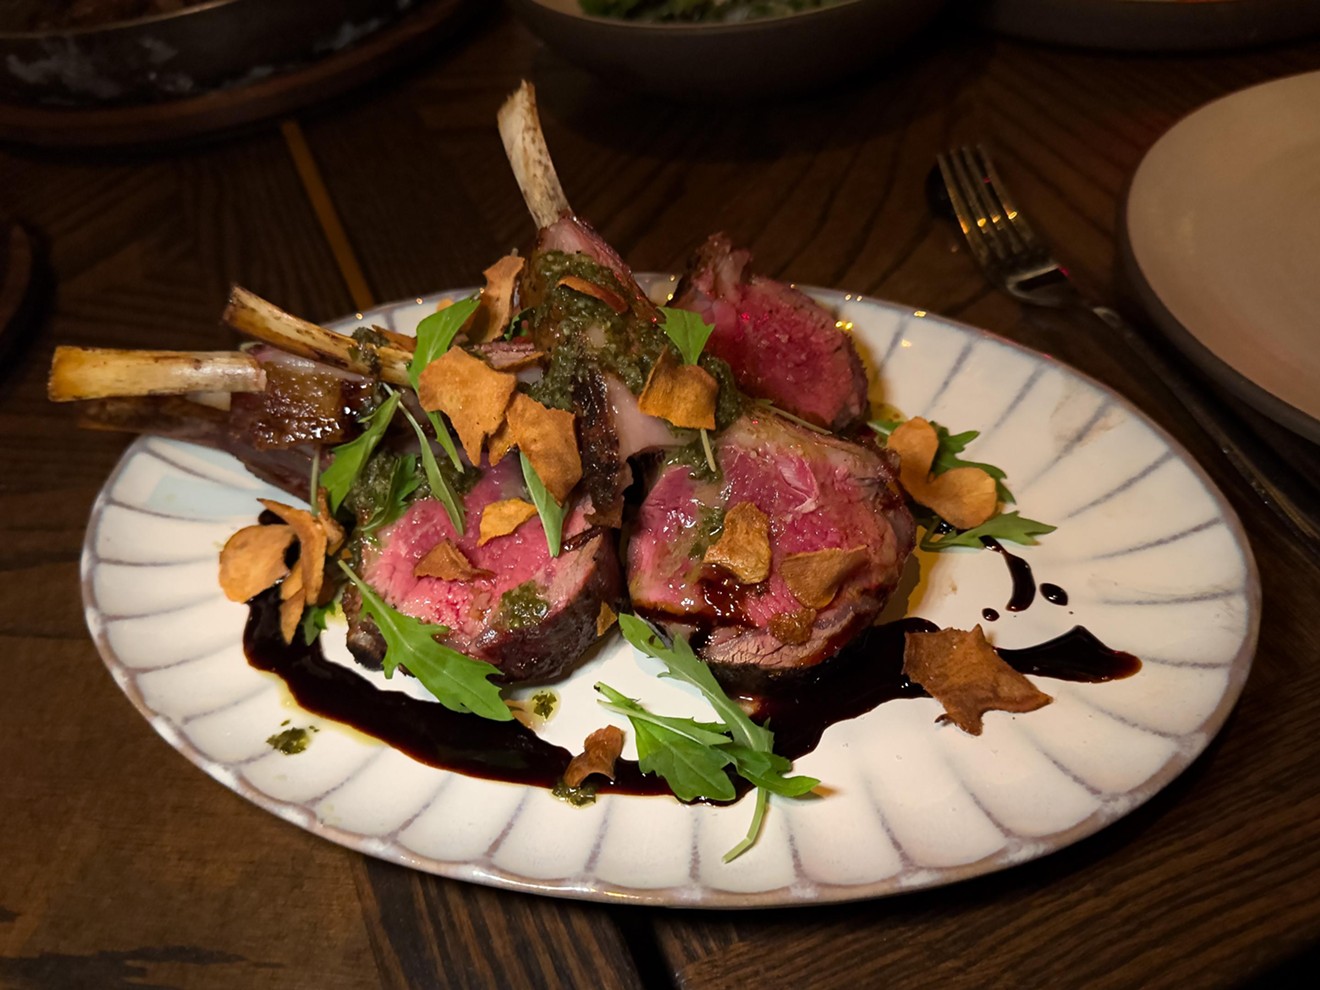 A host of swanky Japanese restaurants have opened across the Valley recently. At Pyro, meats fired on the grill, like the rack of lamb, are the best bet.